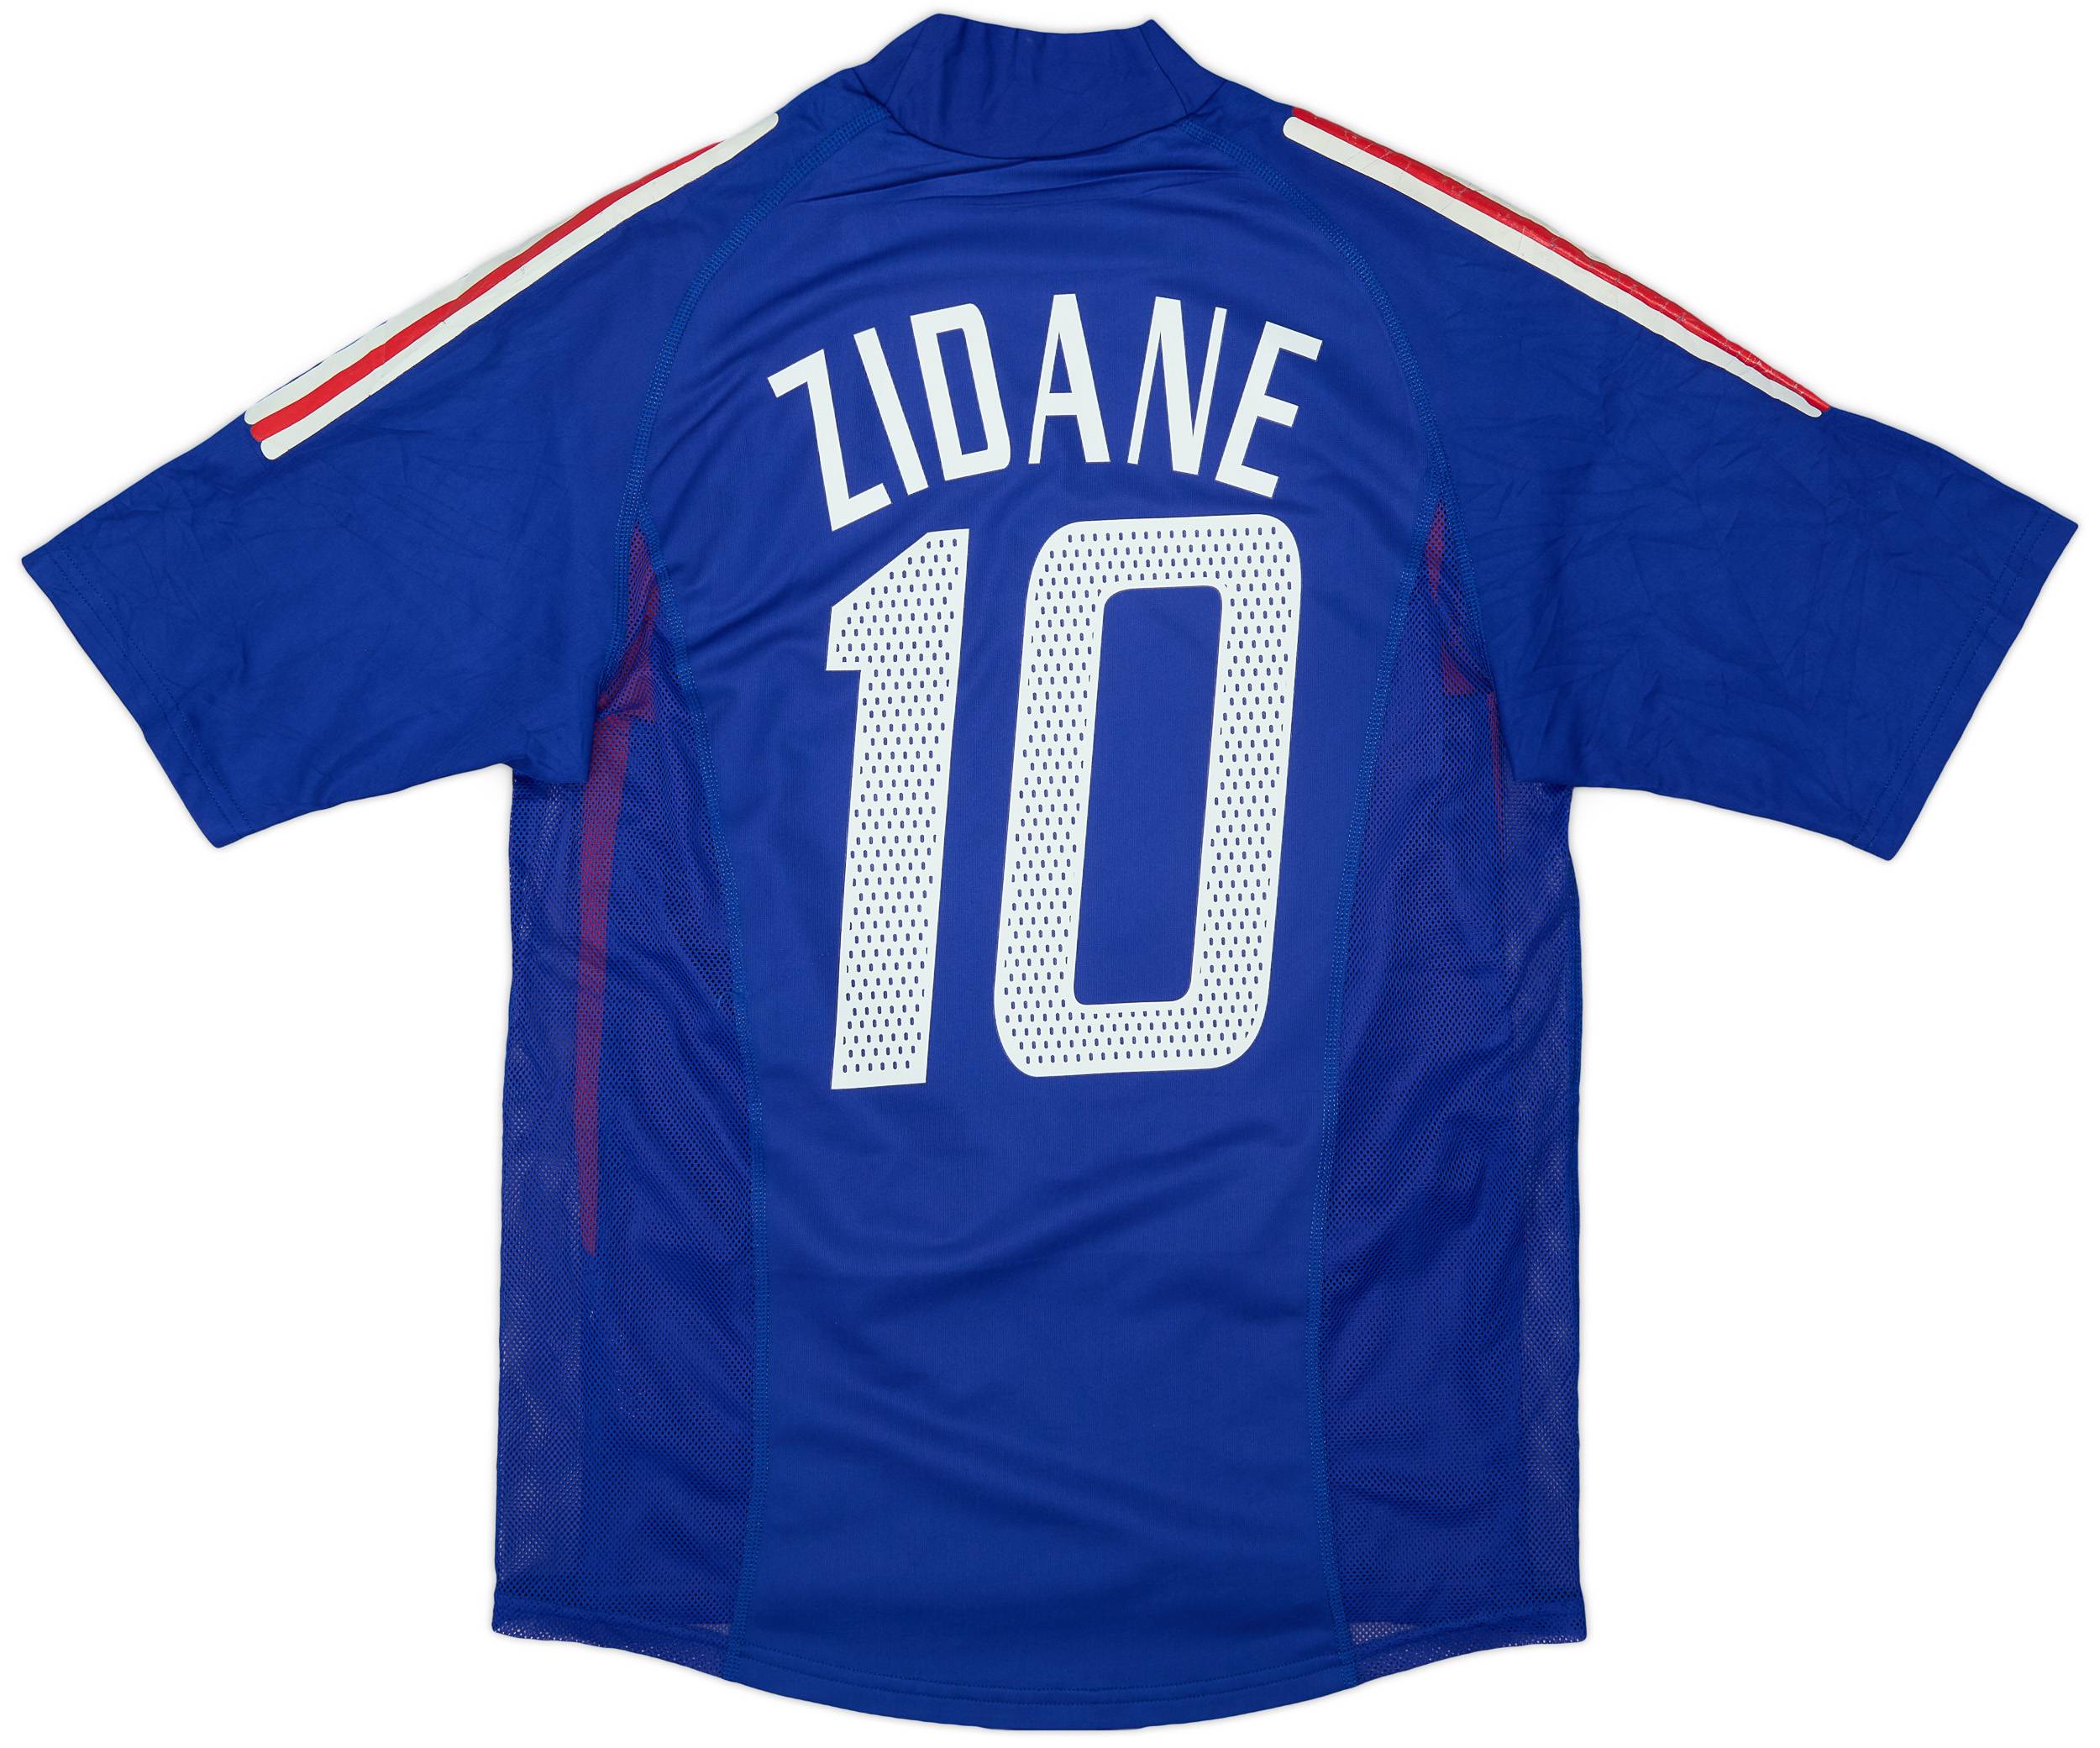 2002-04 France Player Issue Home Shirt Zidane #10 - 7/10 - (S)